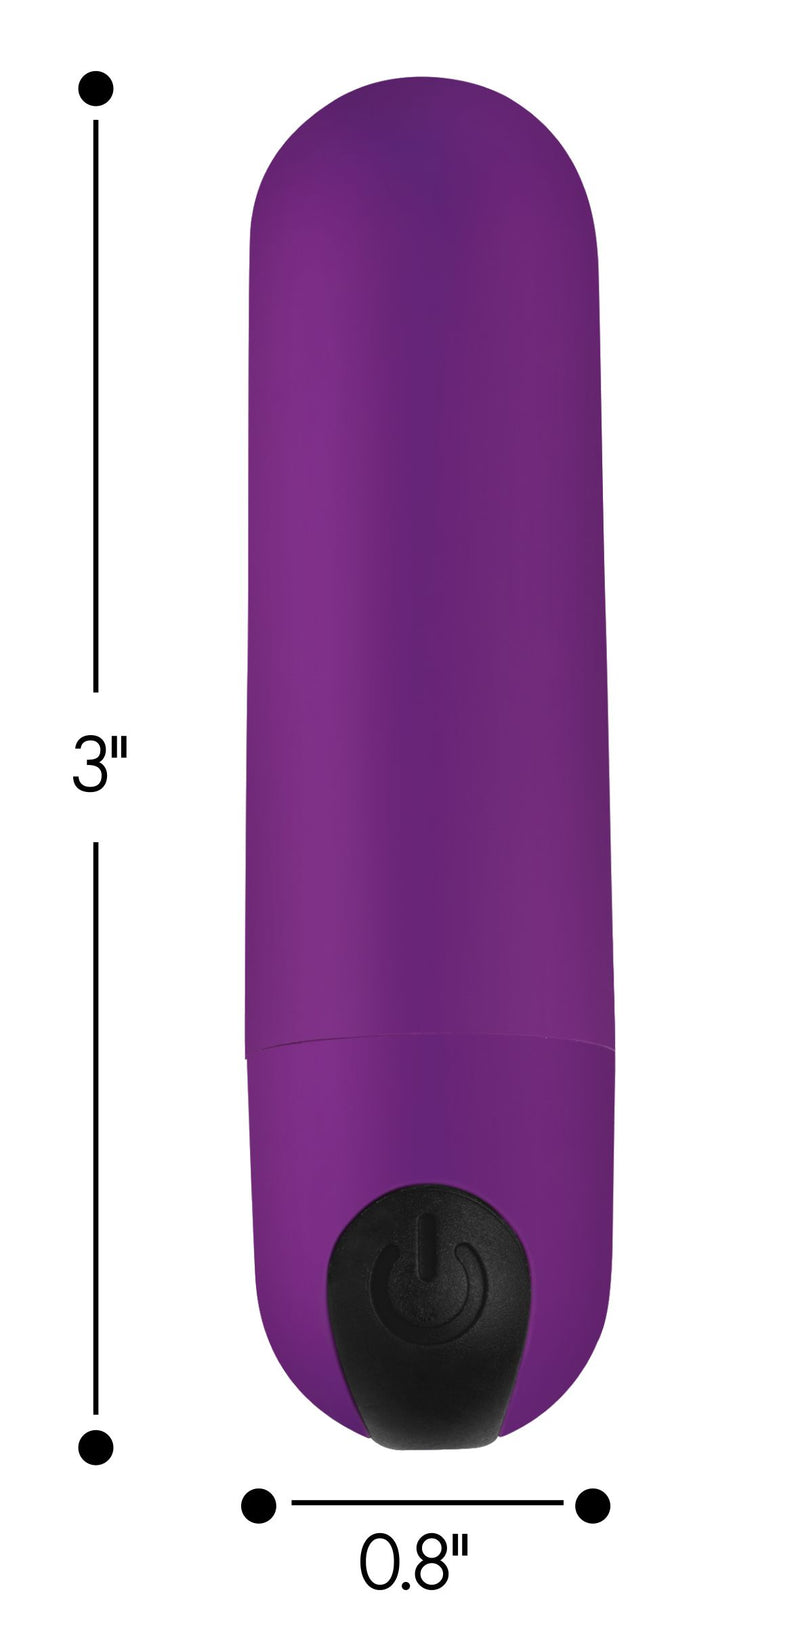 Vibrating Bullet with Remote Control - Purple bullet-vibrators from Bang